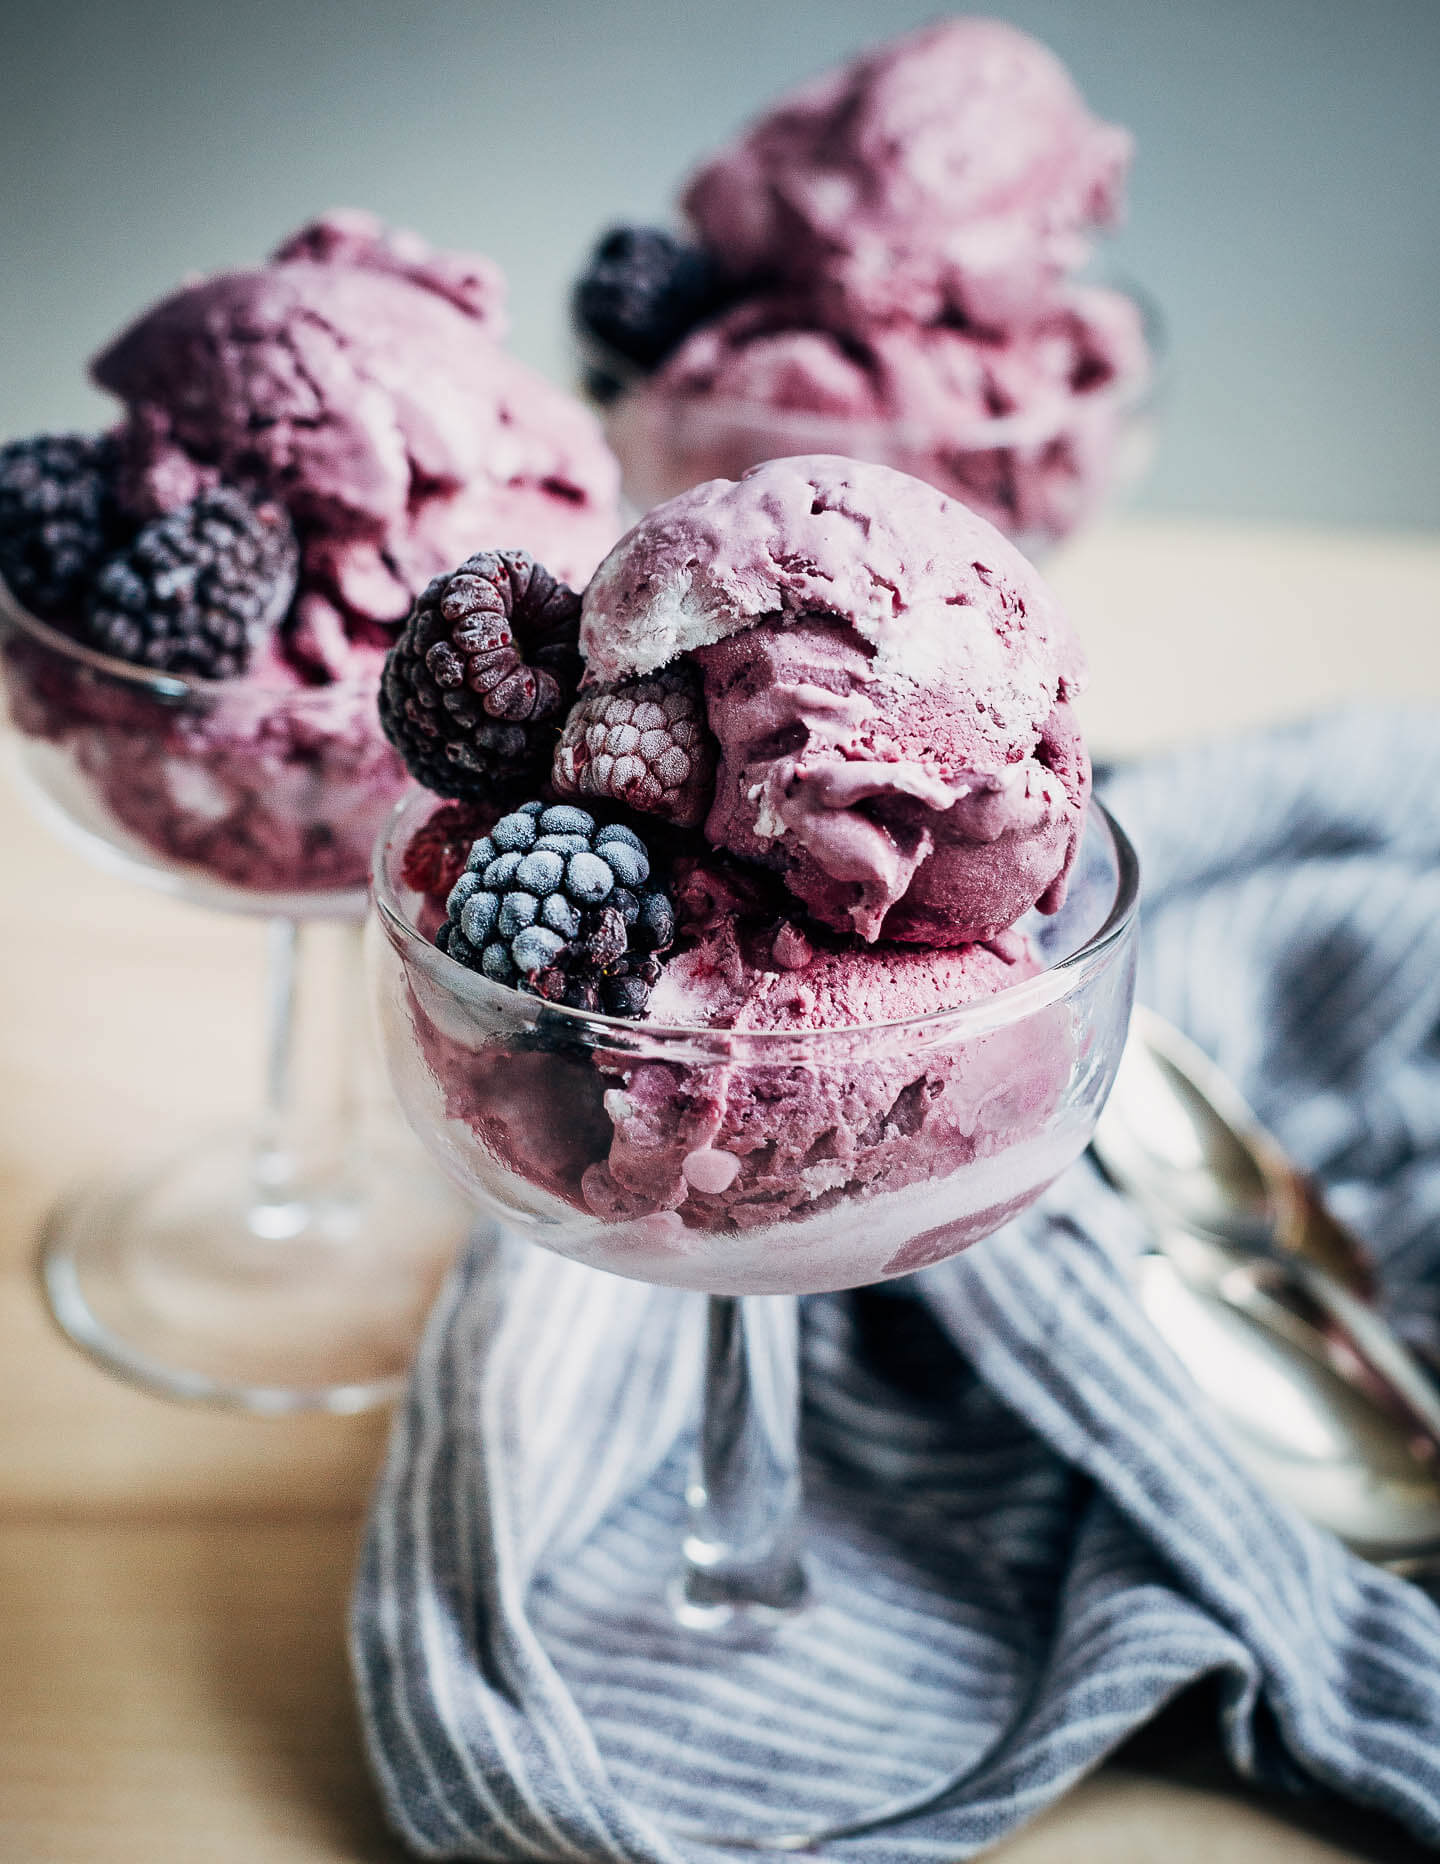 Several dessert glasses filled with scoops of ice cream and berries.